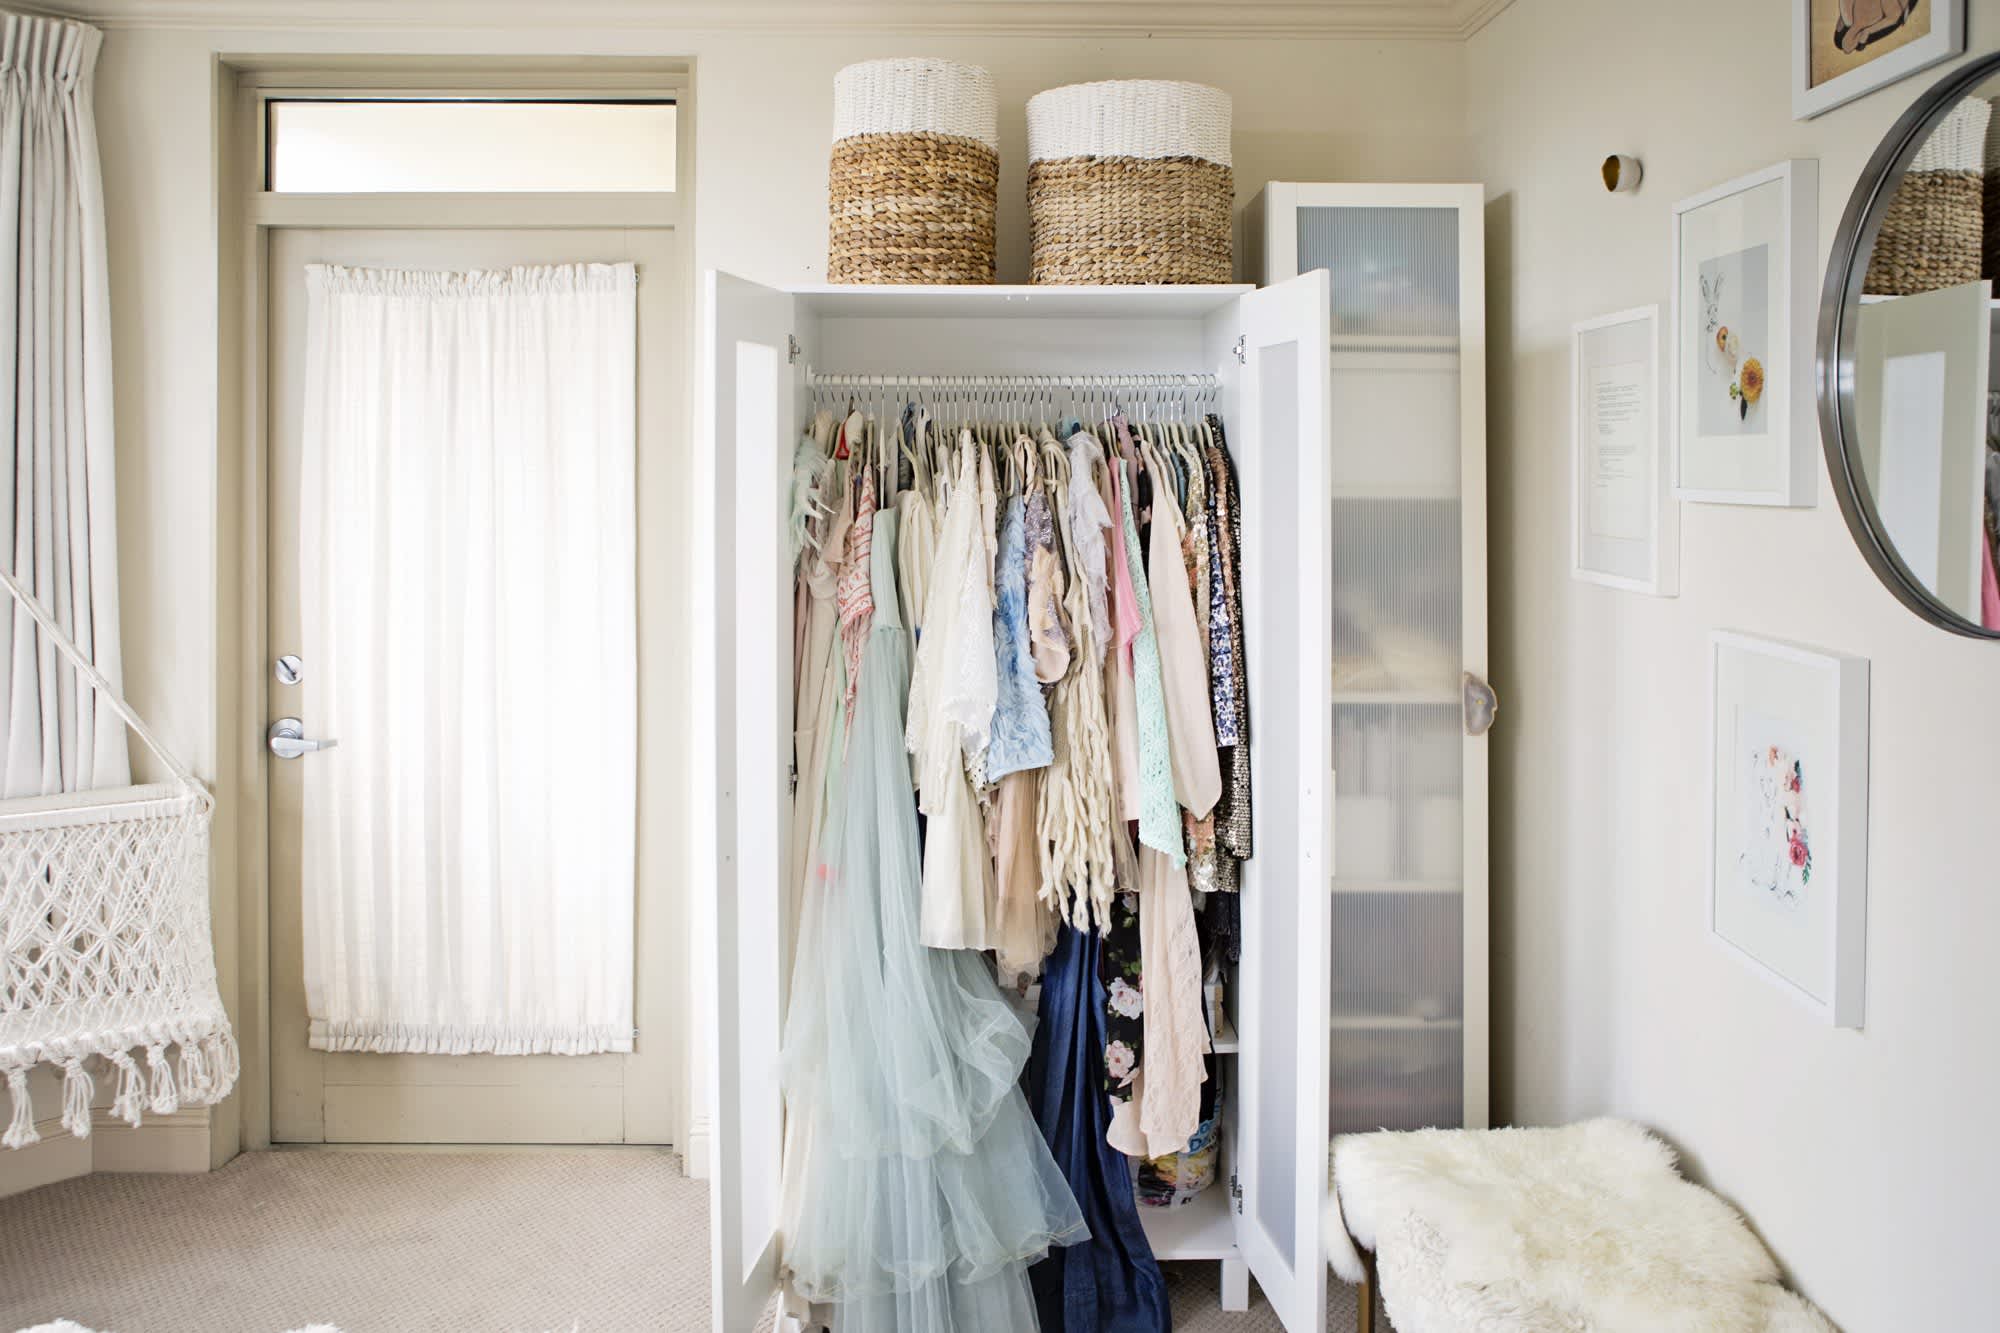 No Closet Solutions for Storage-Challenged Bedrooms